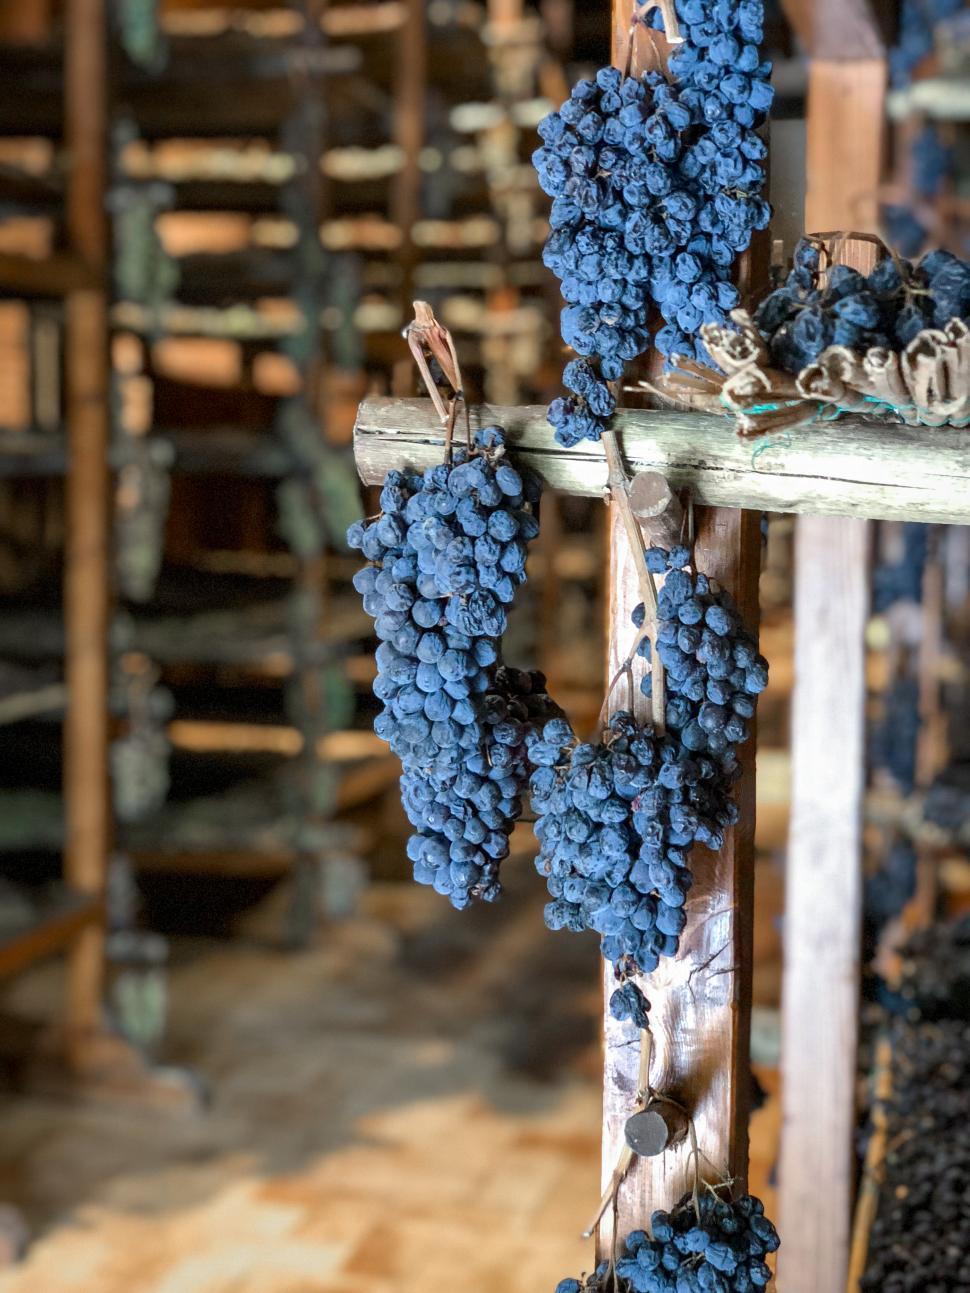 Free Image of Drying Grapes 